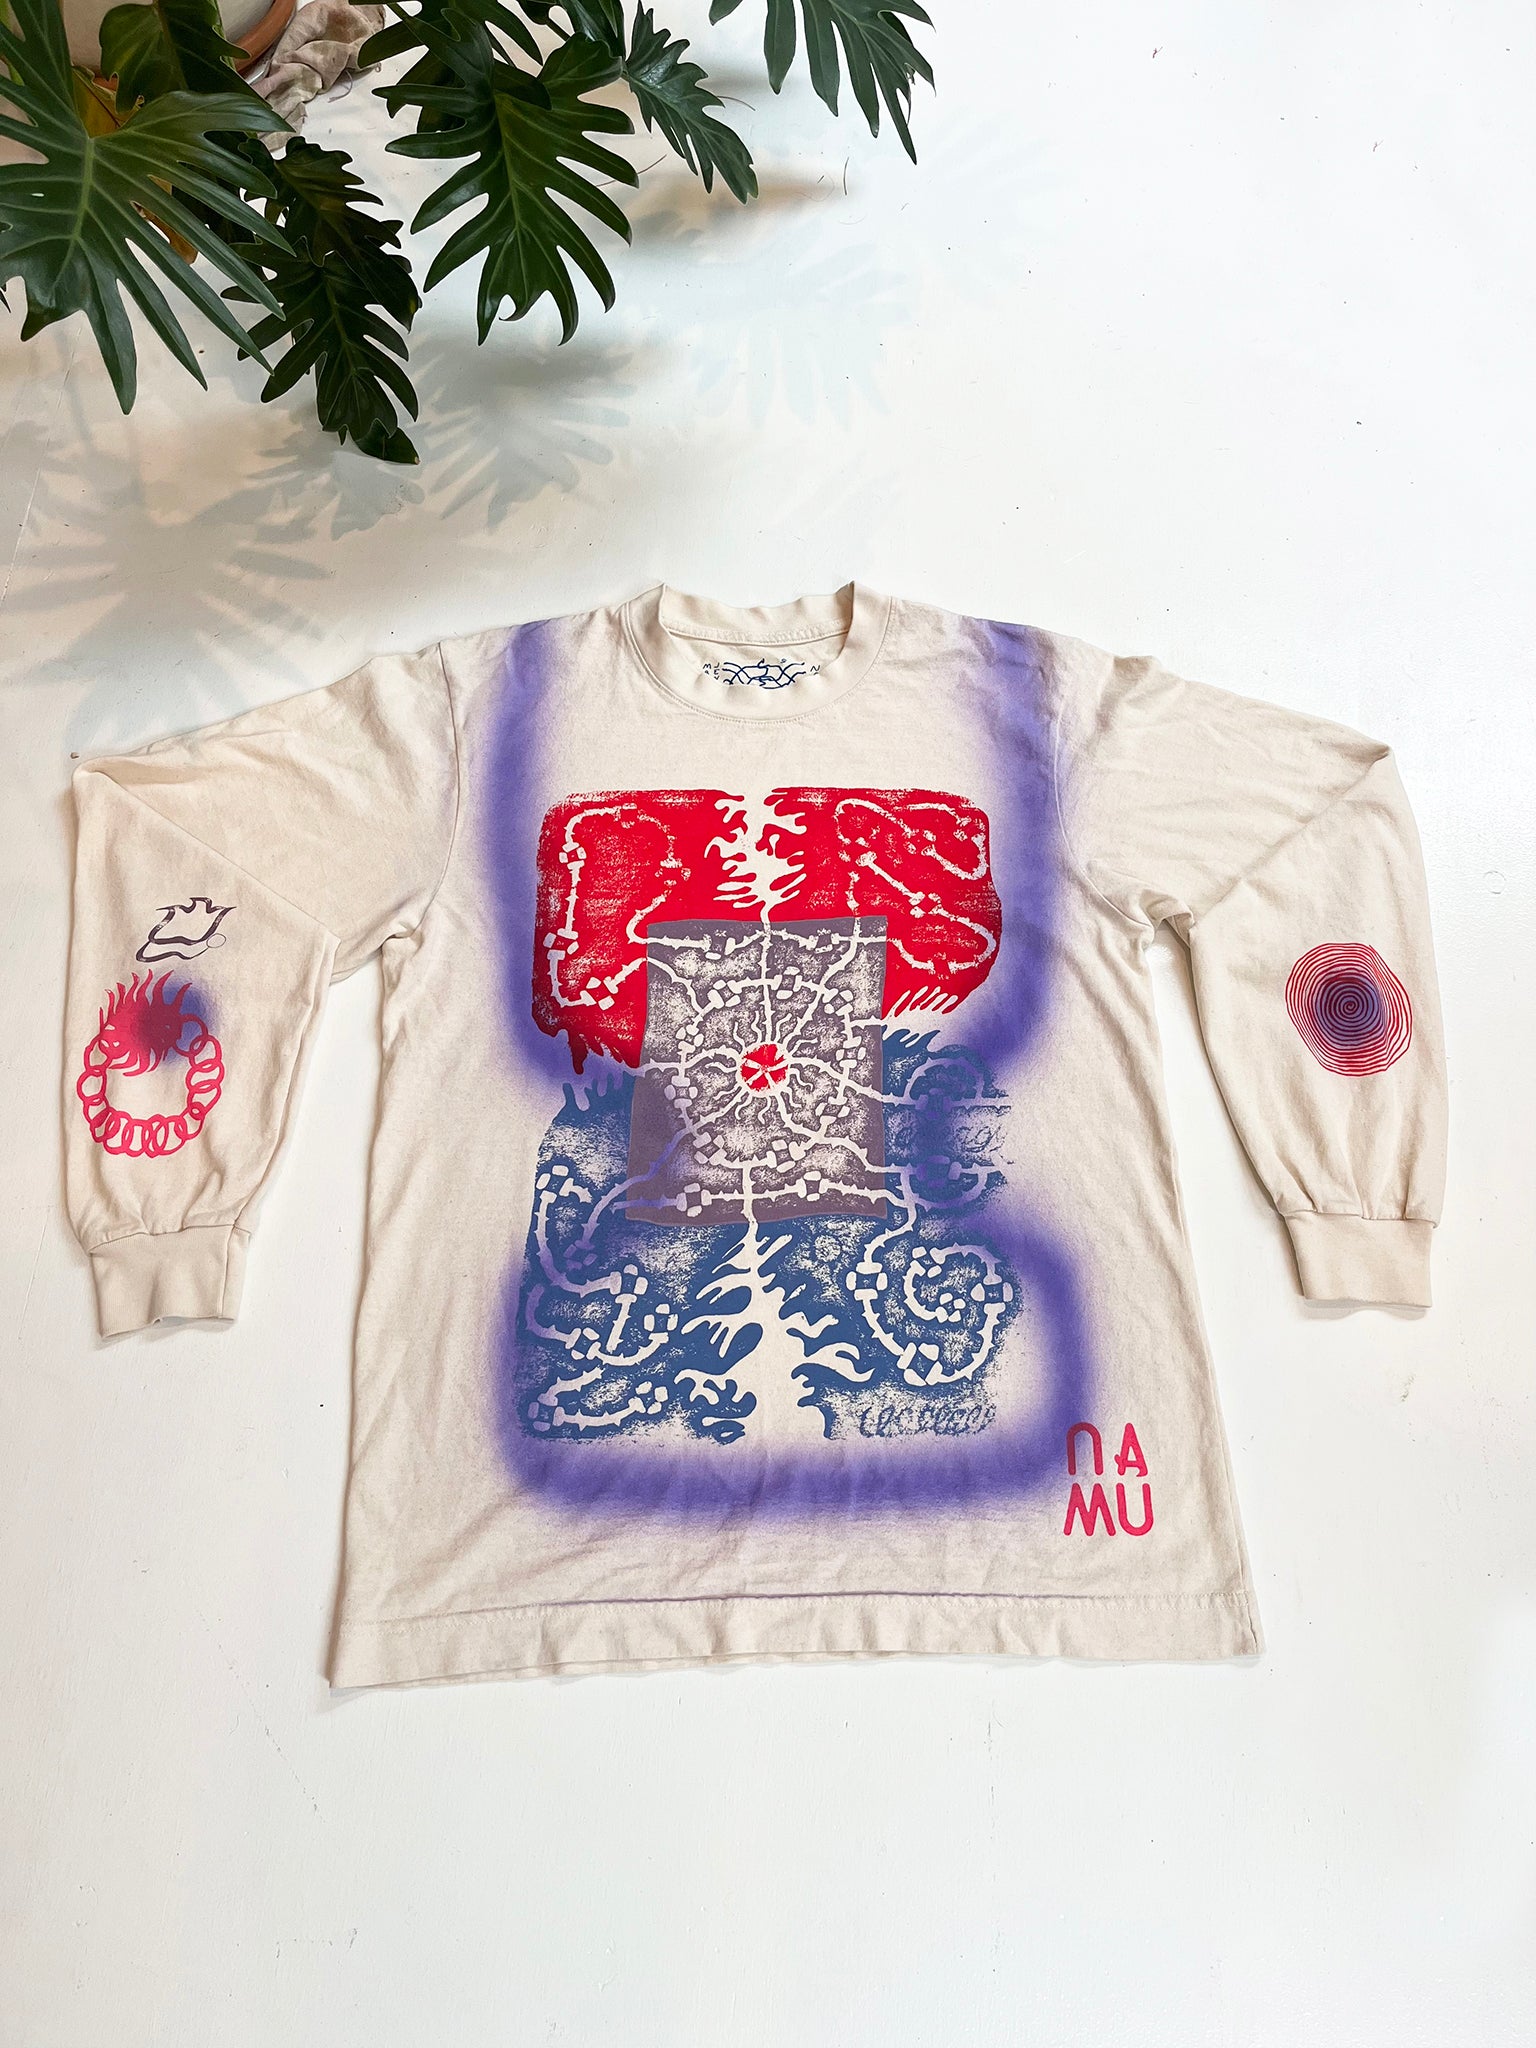 NAMU's first t0shirt collaboration with artist Maren Jensen, a whiite long-sleeve cotton tshirt screenprinted with a multi color maze-like graphic overlayed with a soft purple airbrushed shape lays spread out against a white background under a green plant.